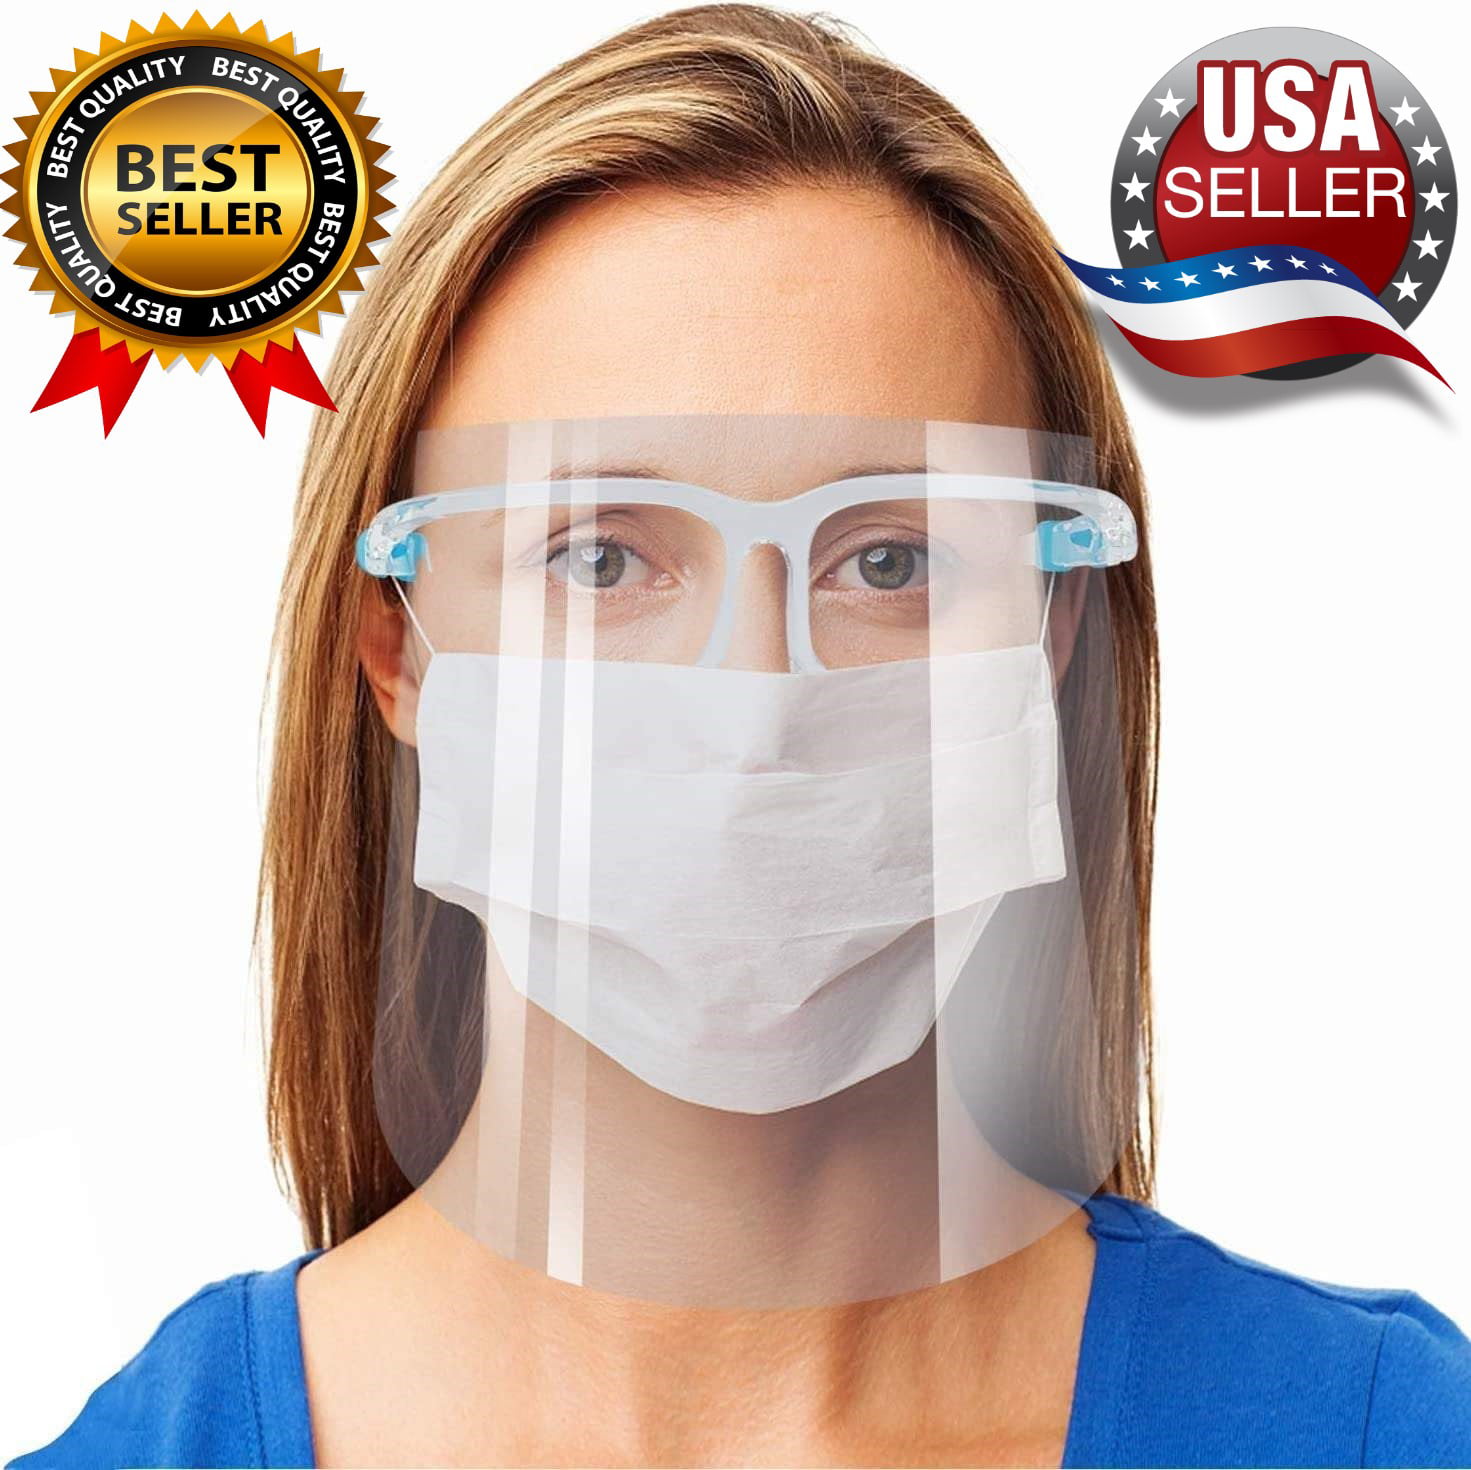 2 PACK Face Shield Full Coverage Reusable Mask Droplet Protection Medical Grade